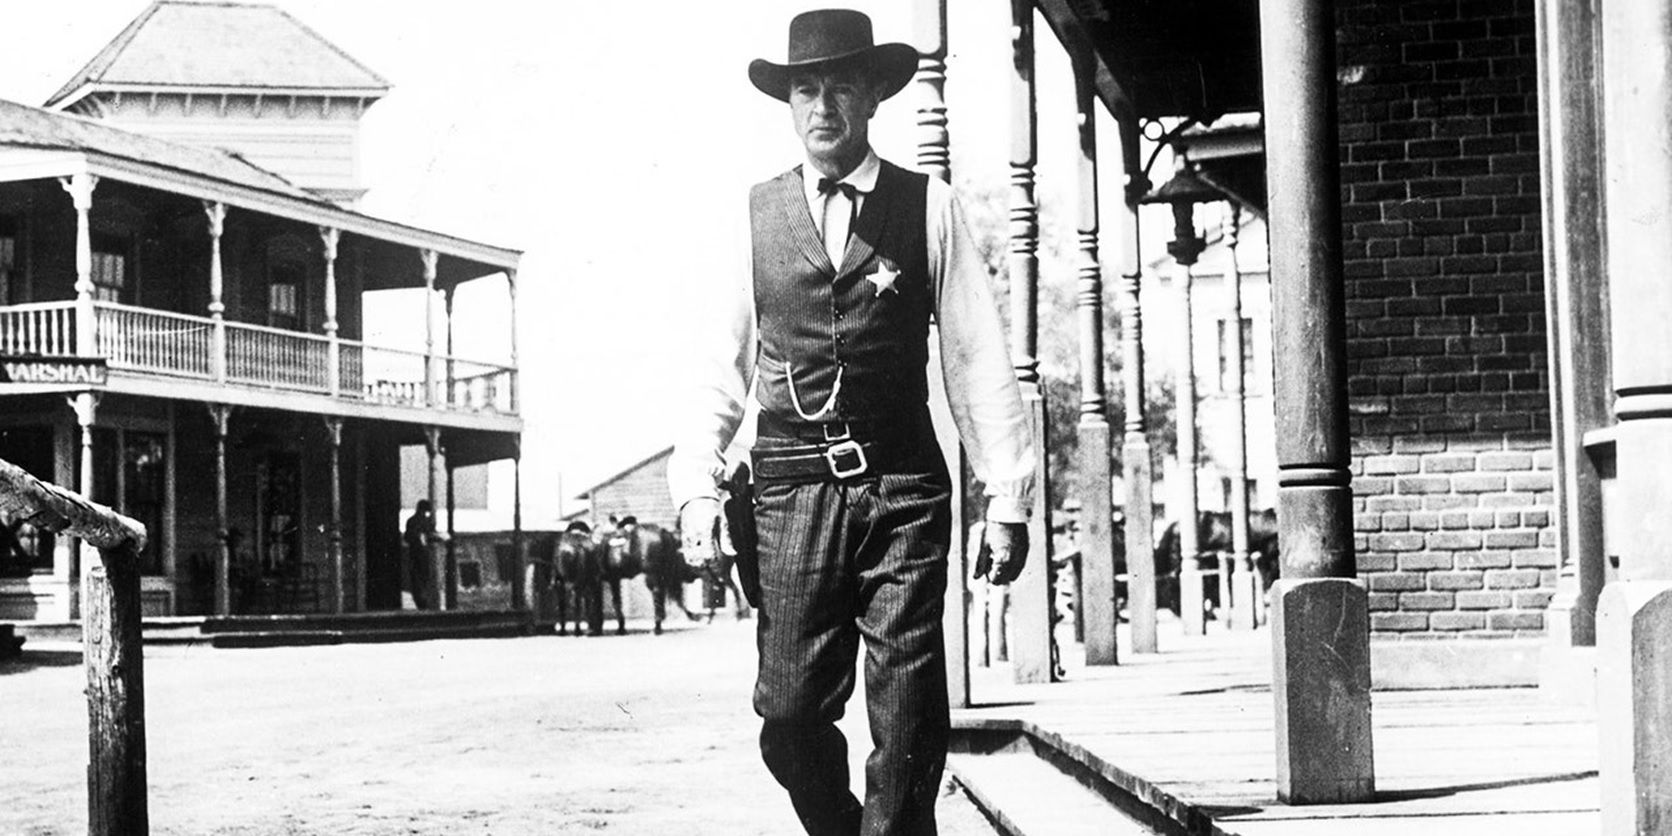 Gary Cooper in the town square in High Noon